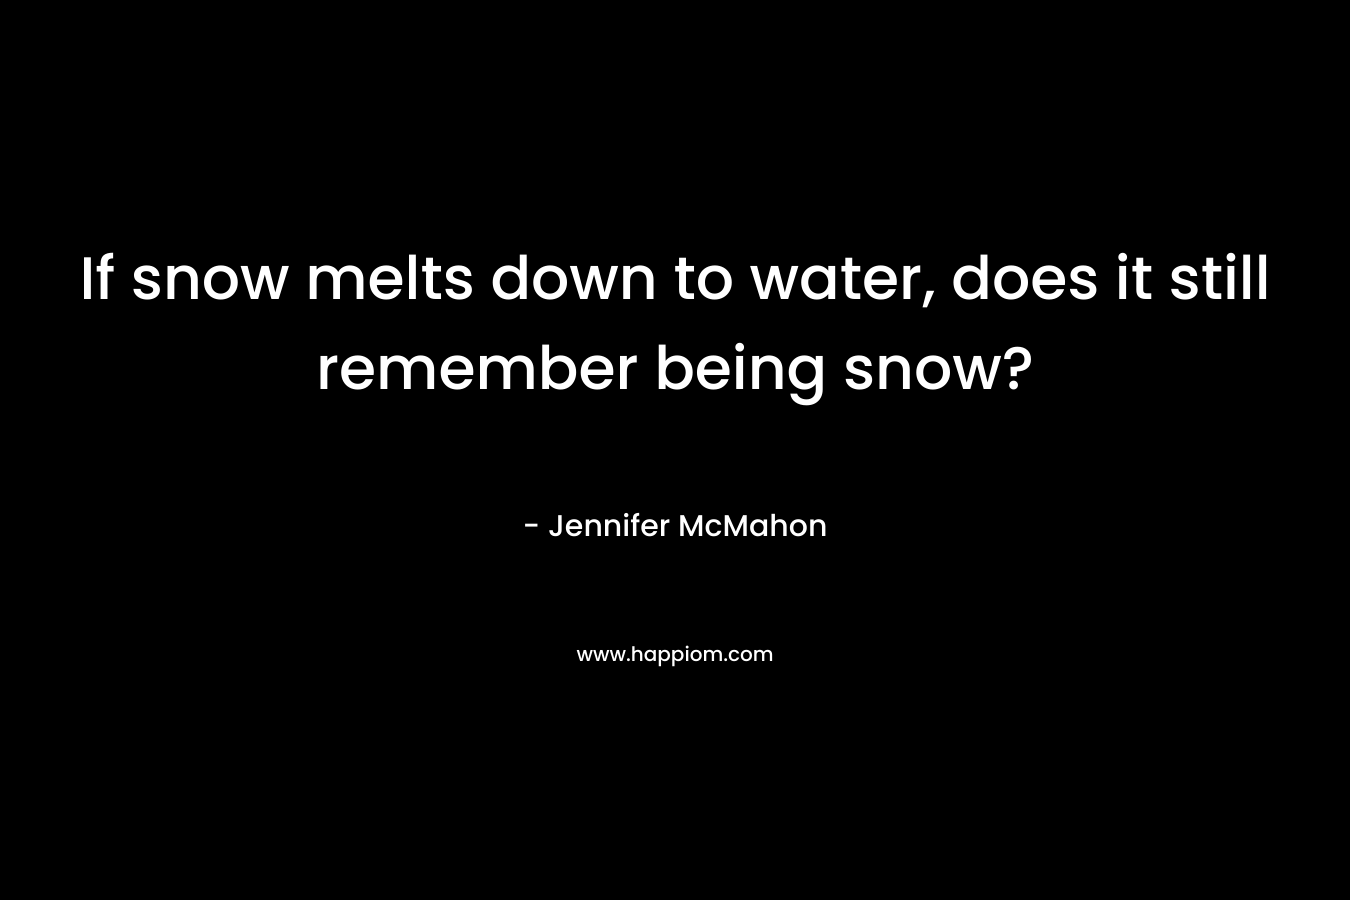 If snow melts down to water, does it still remember being snow?